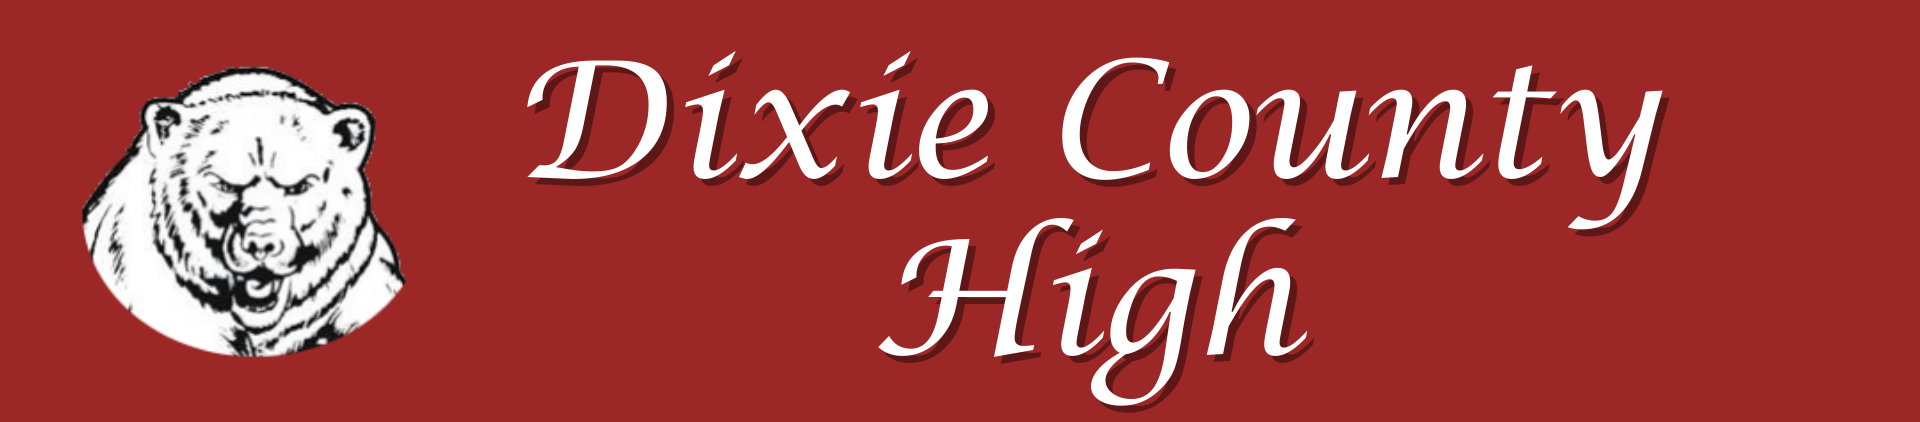 a logo for dixie county high school with a tiger on it